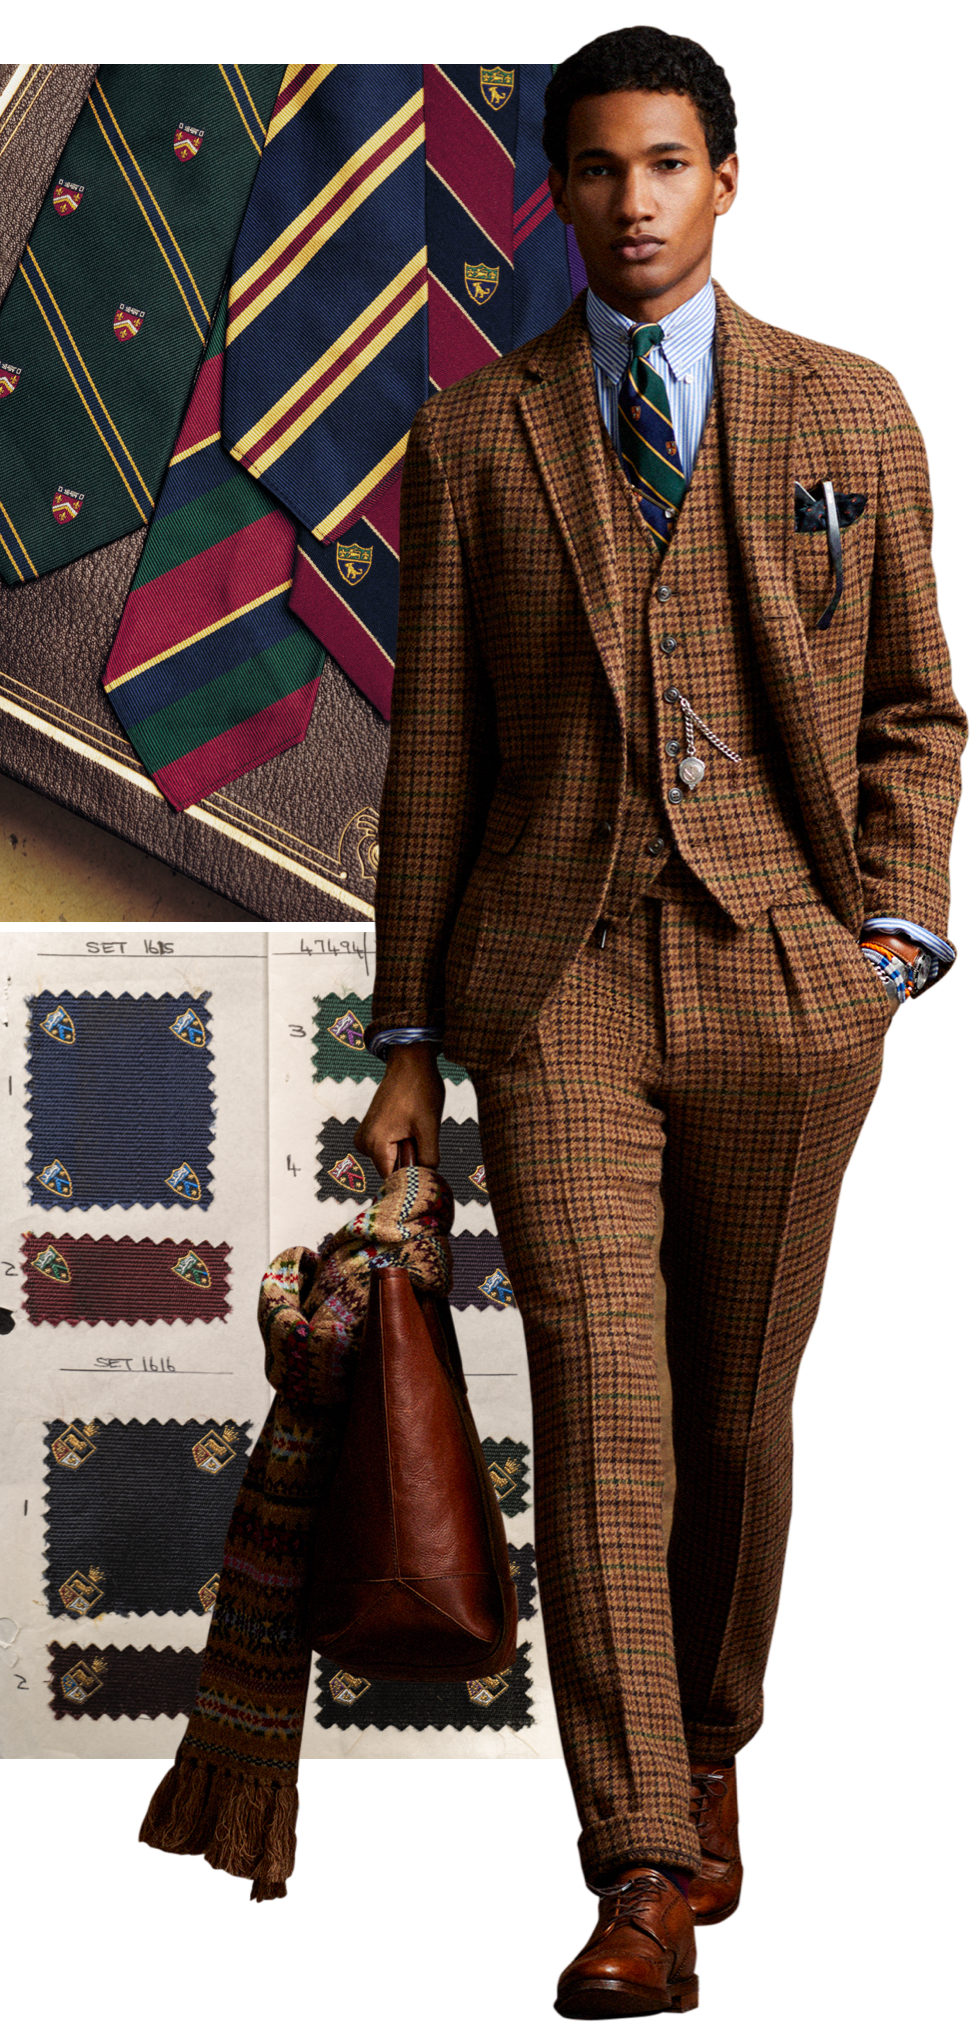 <strong>RIDING THE REPP</strong><br/><span>The author having a cup of Ralph’s Coffee; a selection of striped and heraldic repp ties; a look from this season’s Polo Originals; and a swatch card from a mill in England, where Polo repp ties have been woven for many years</span>